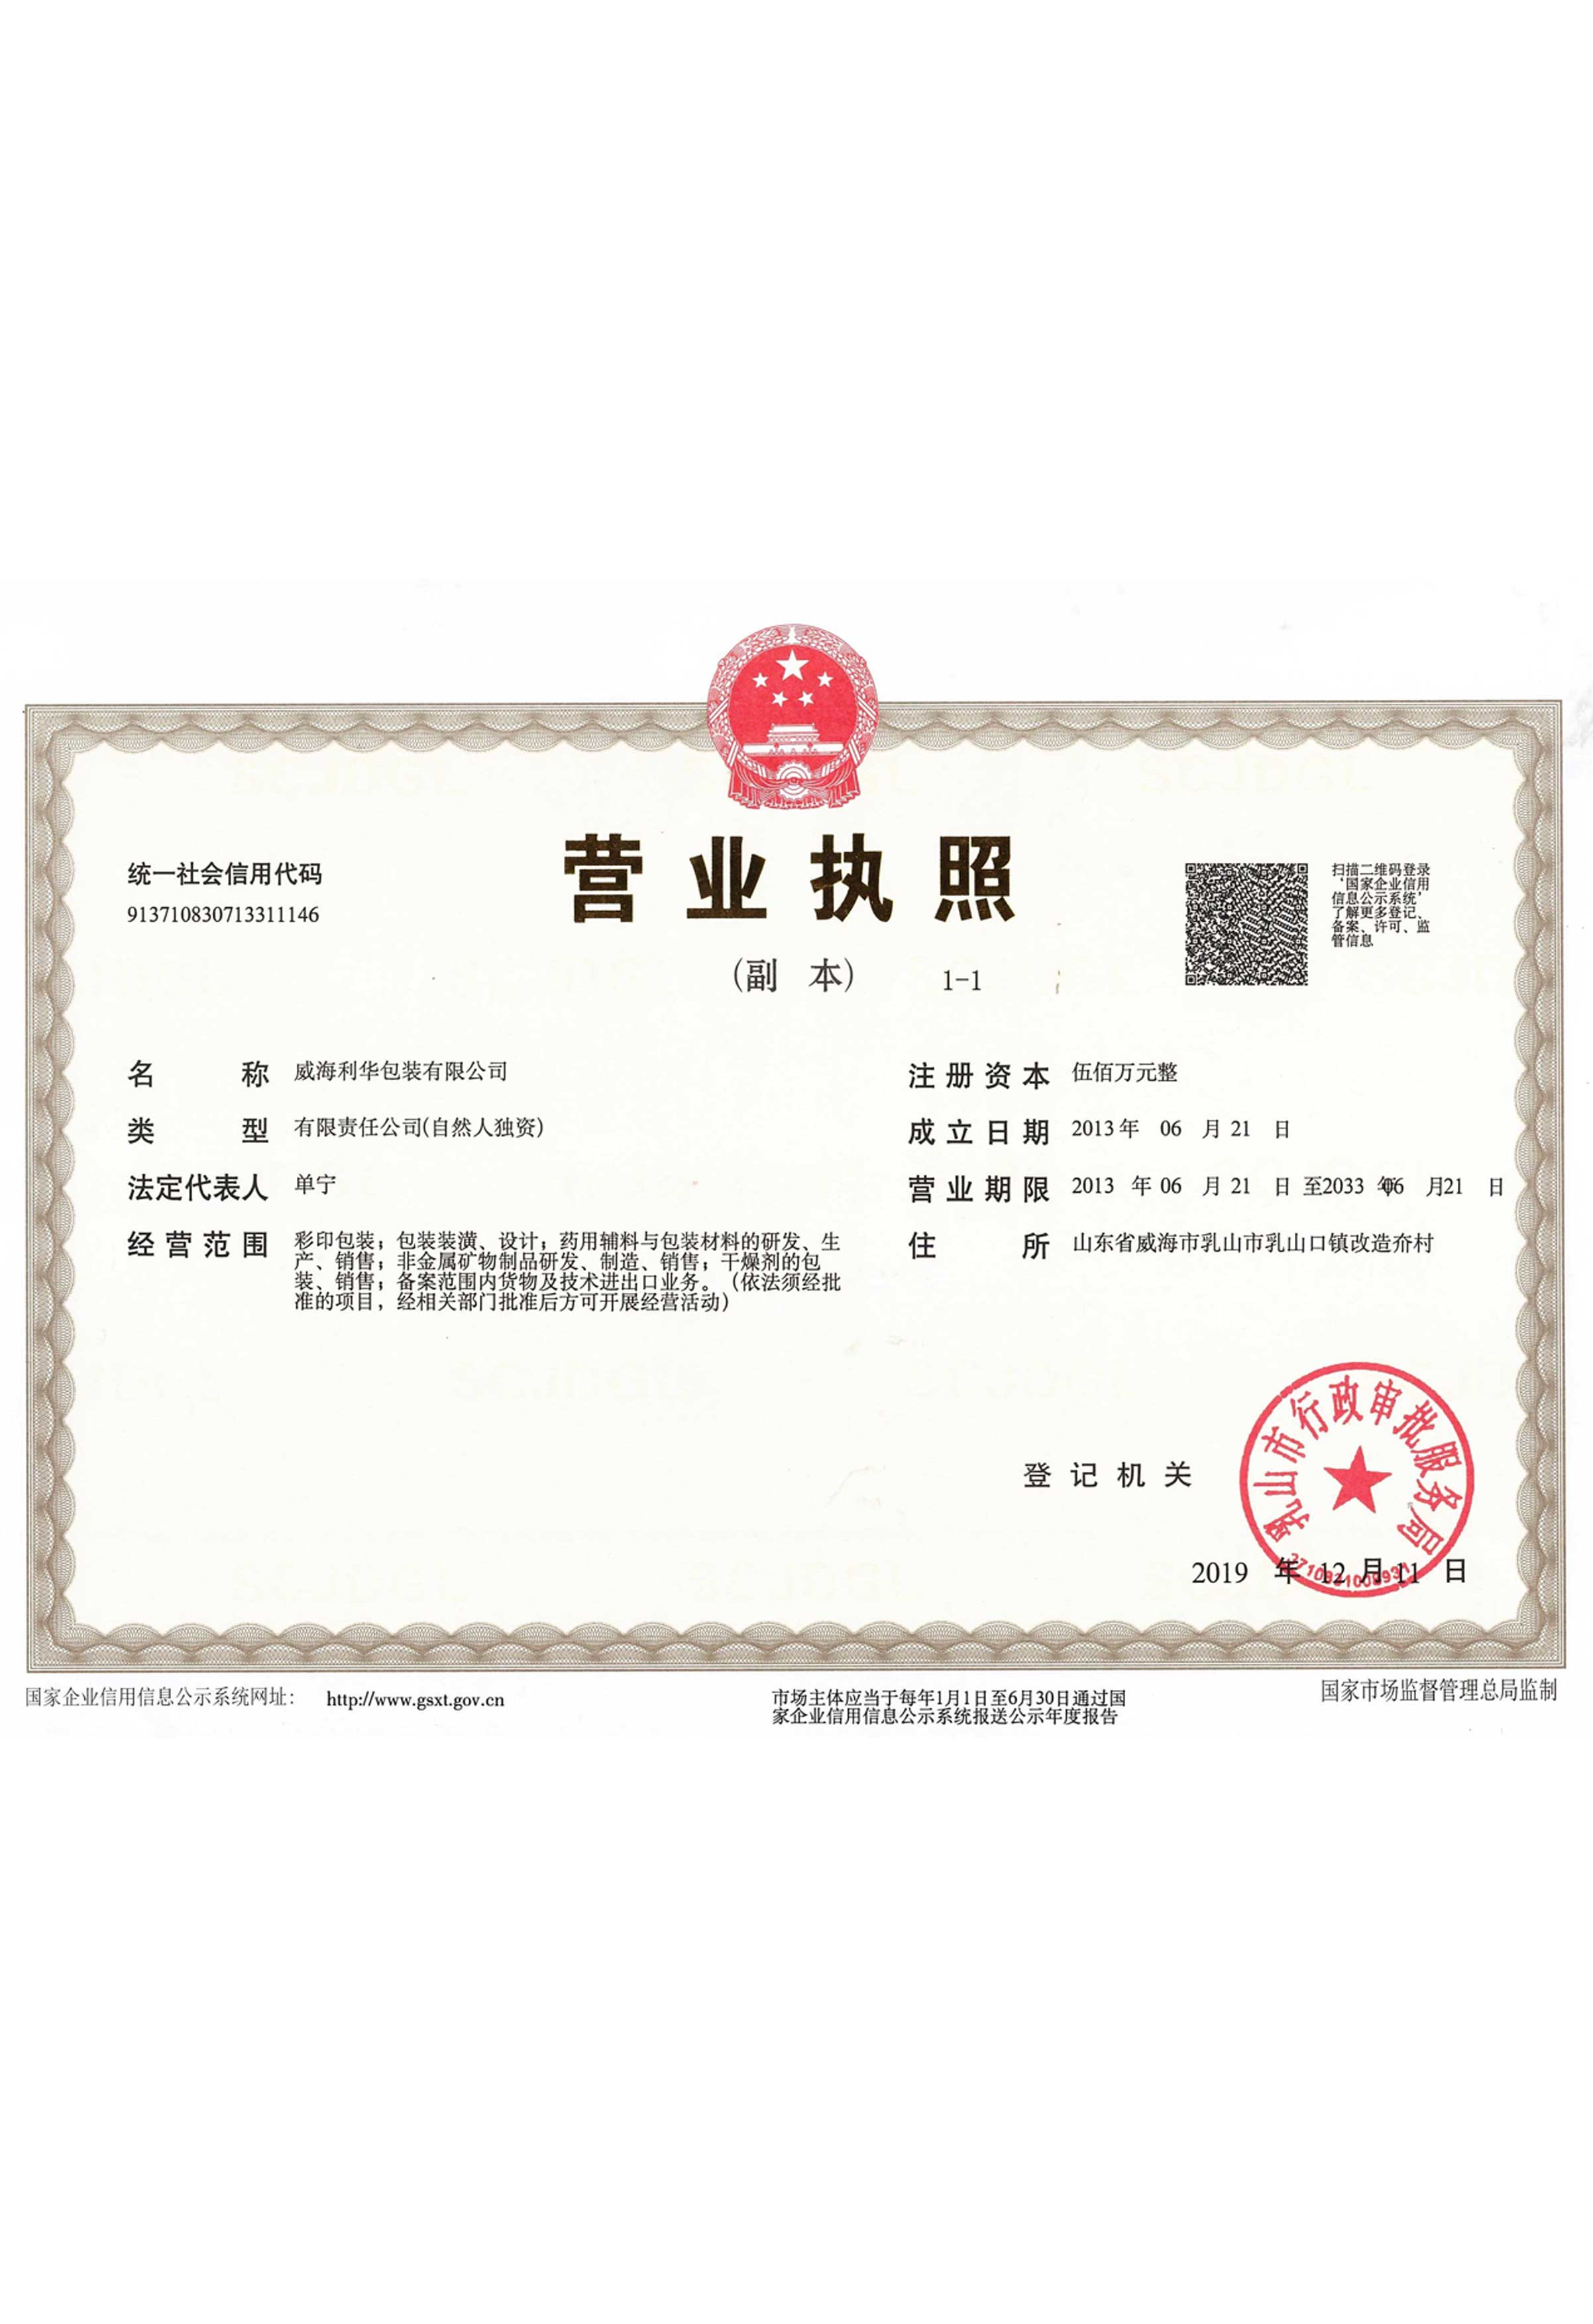 Business license (duplicate)